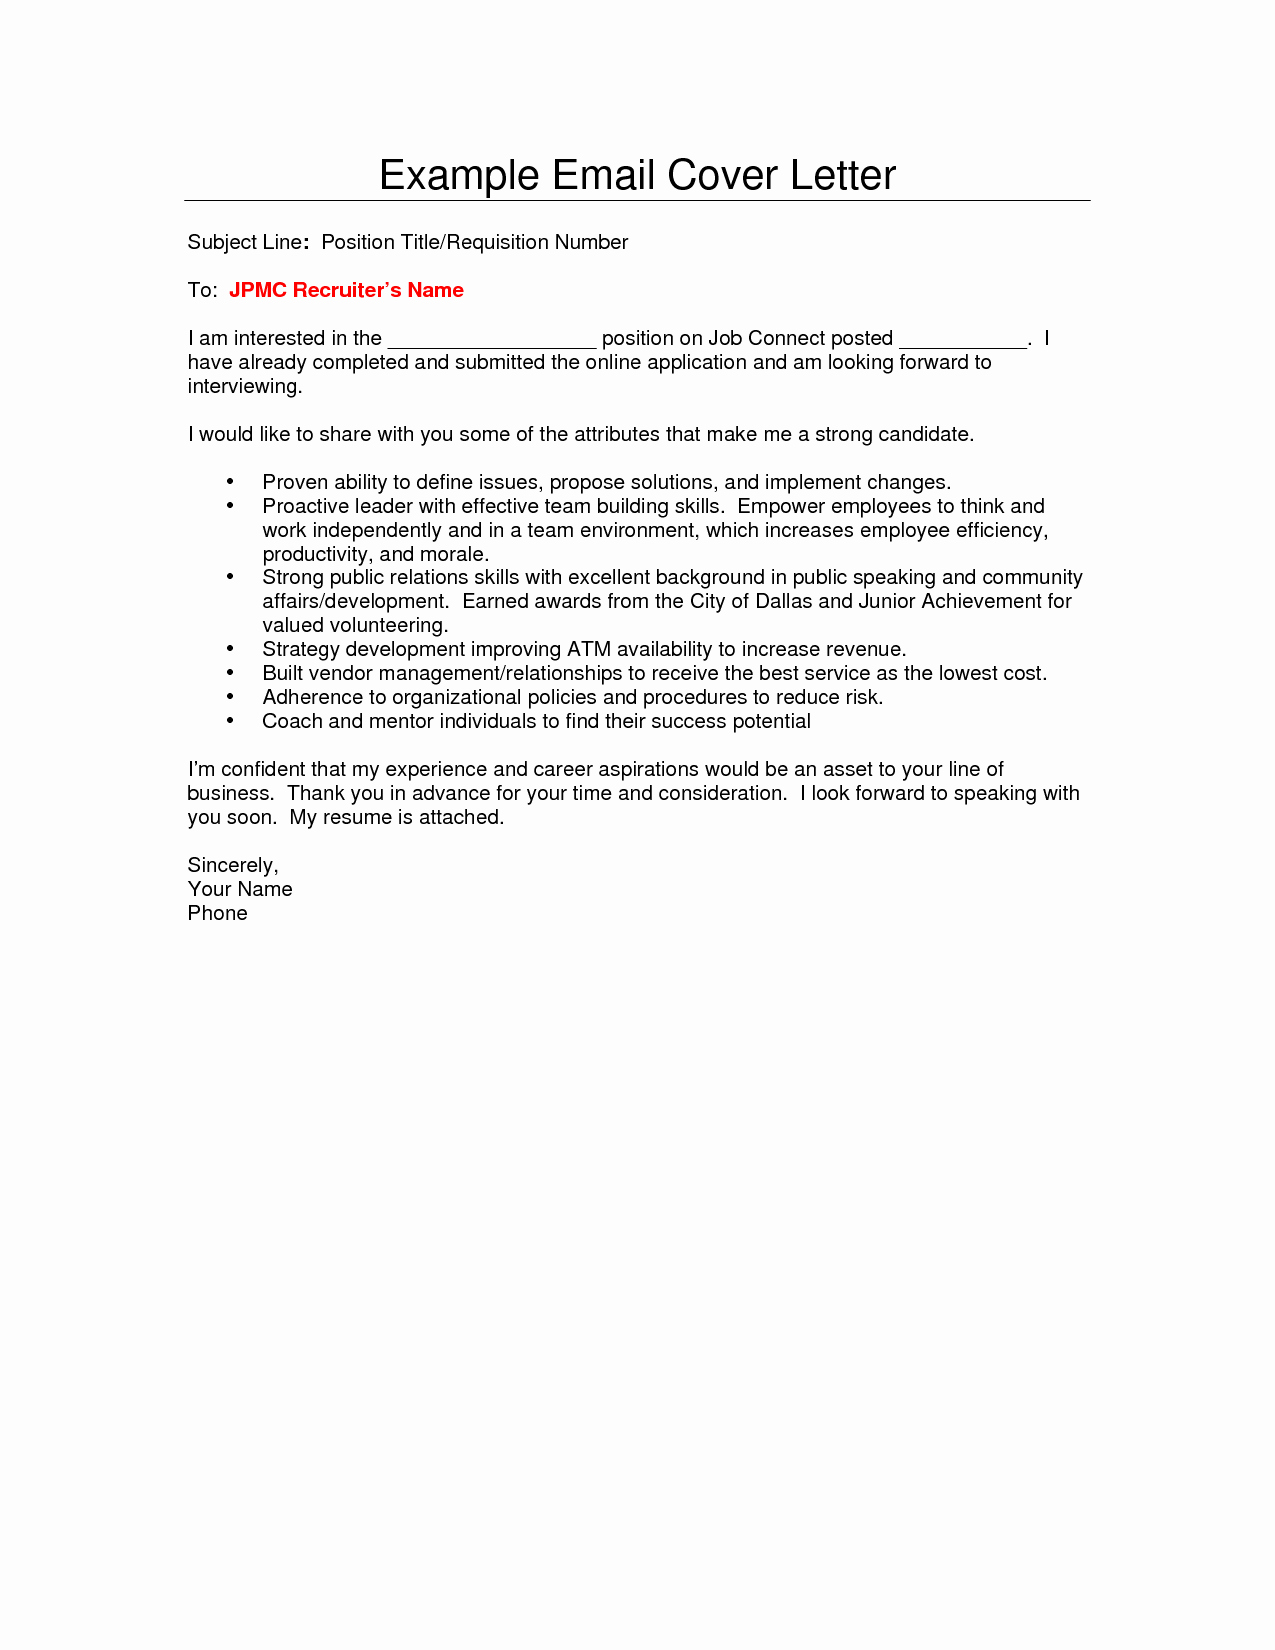 Emailed Cover Letter format Best Of Email Cover Letters Innazo Innazo